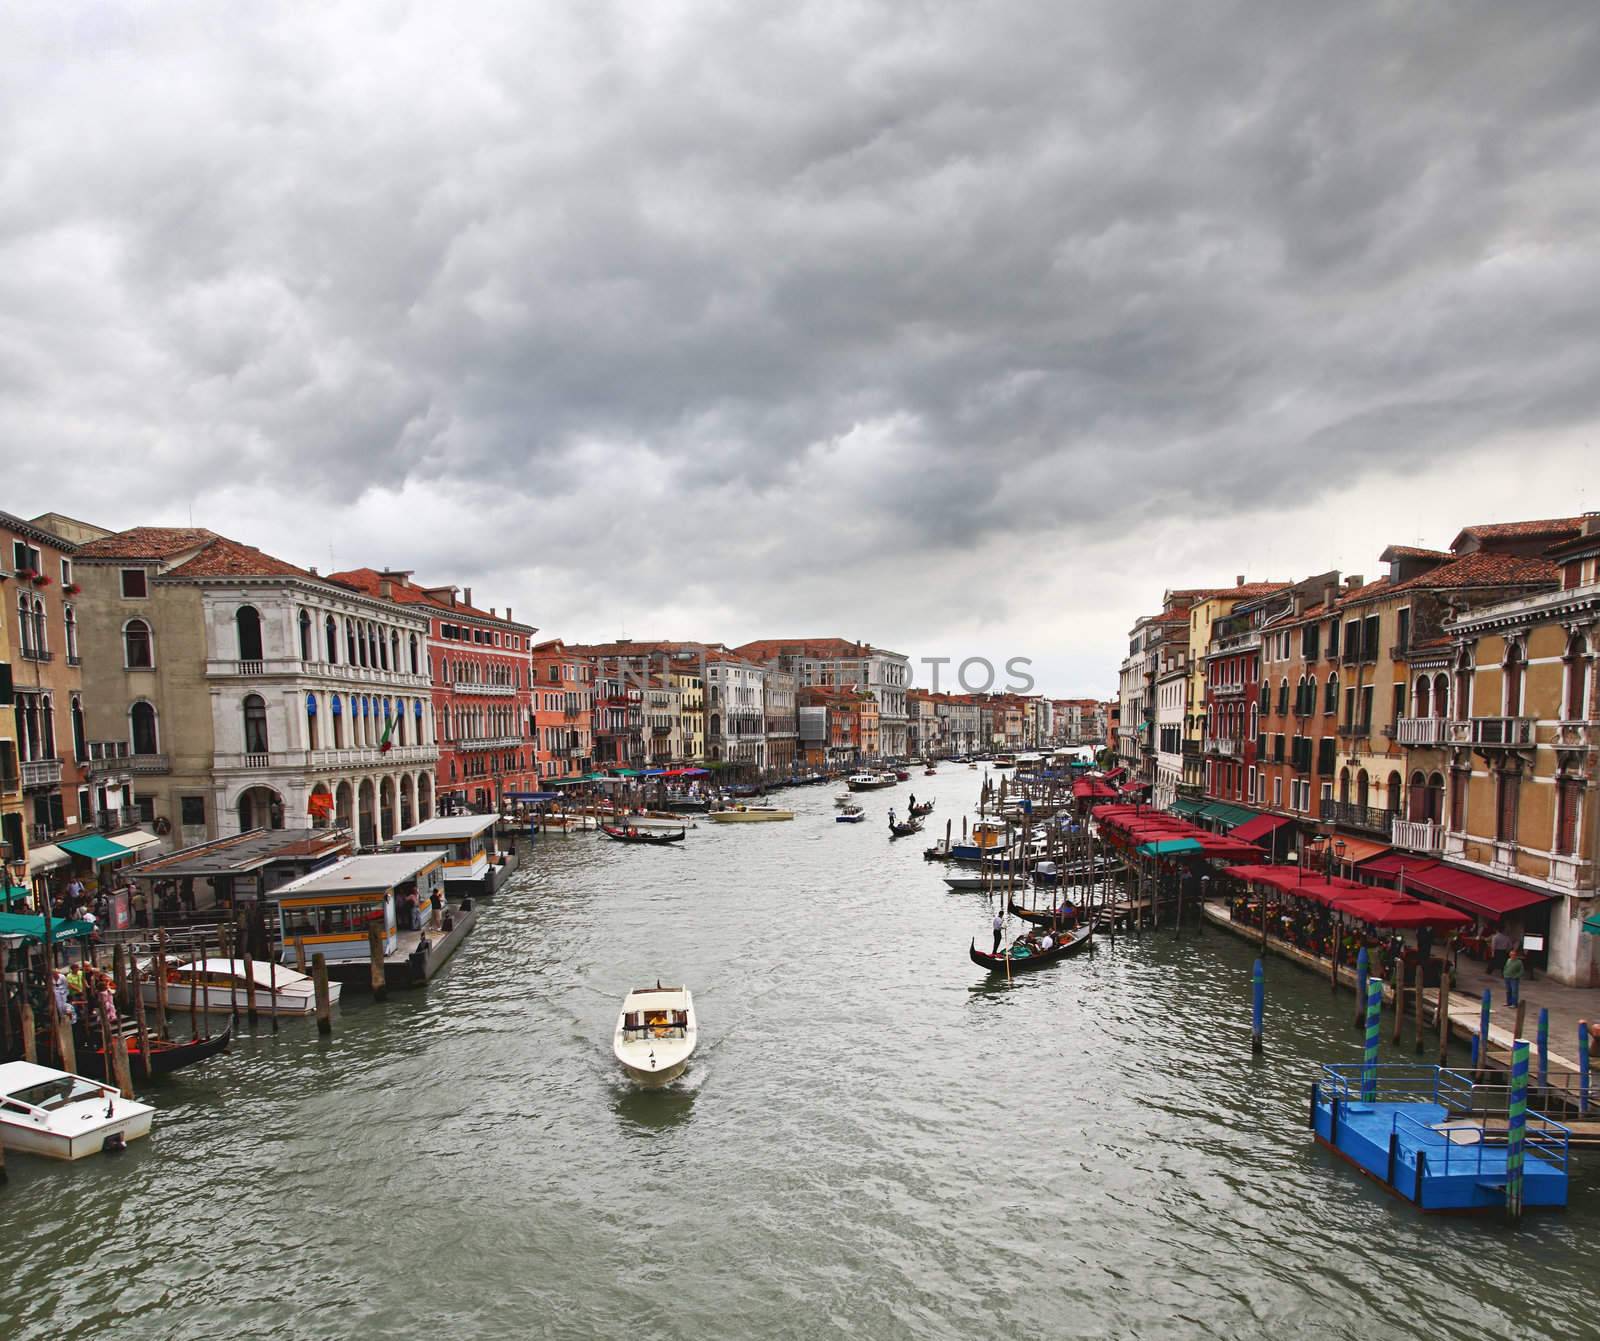 The scenery along the Grand Canal in Venice Italy 